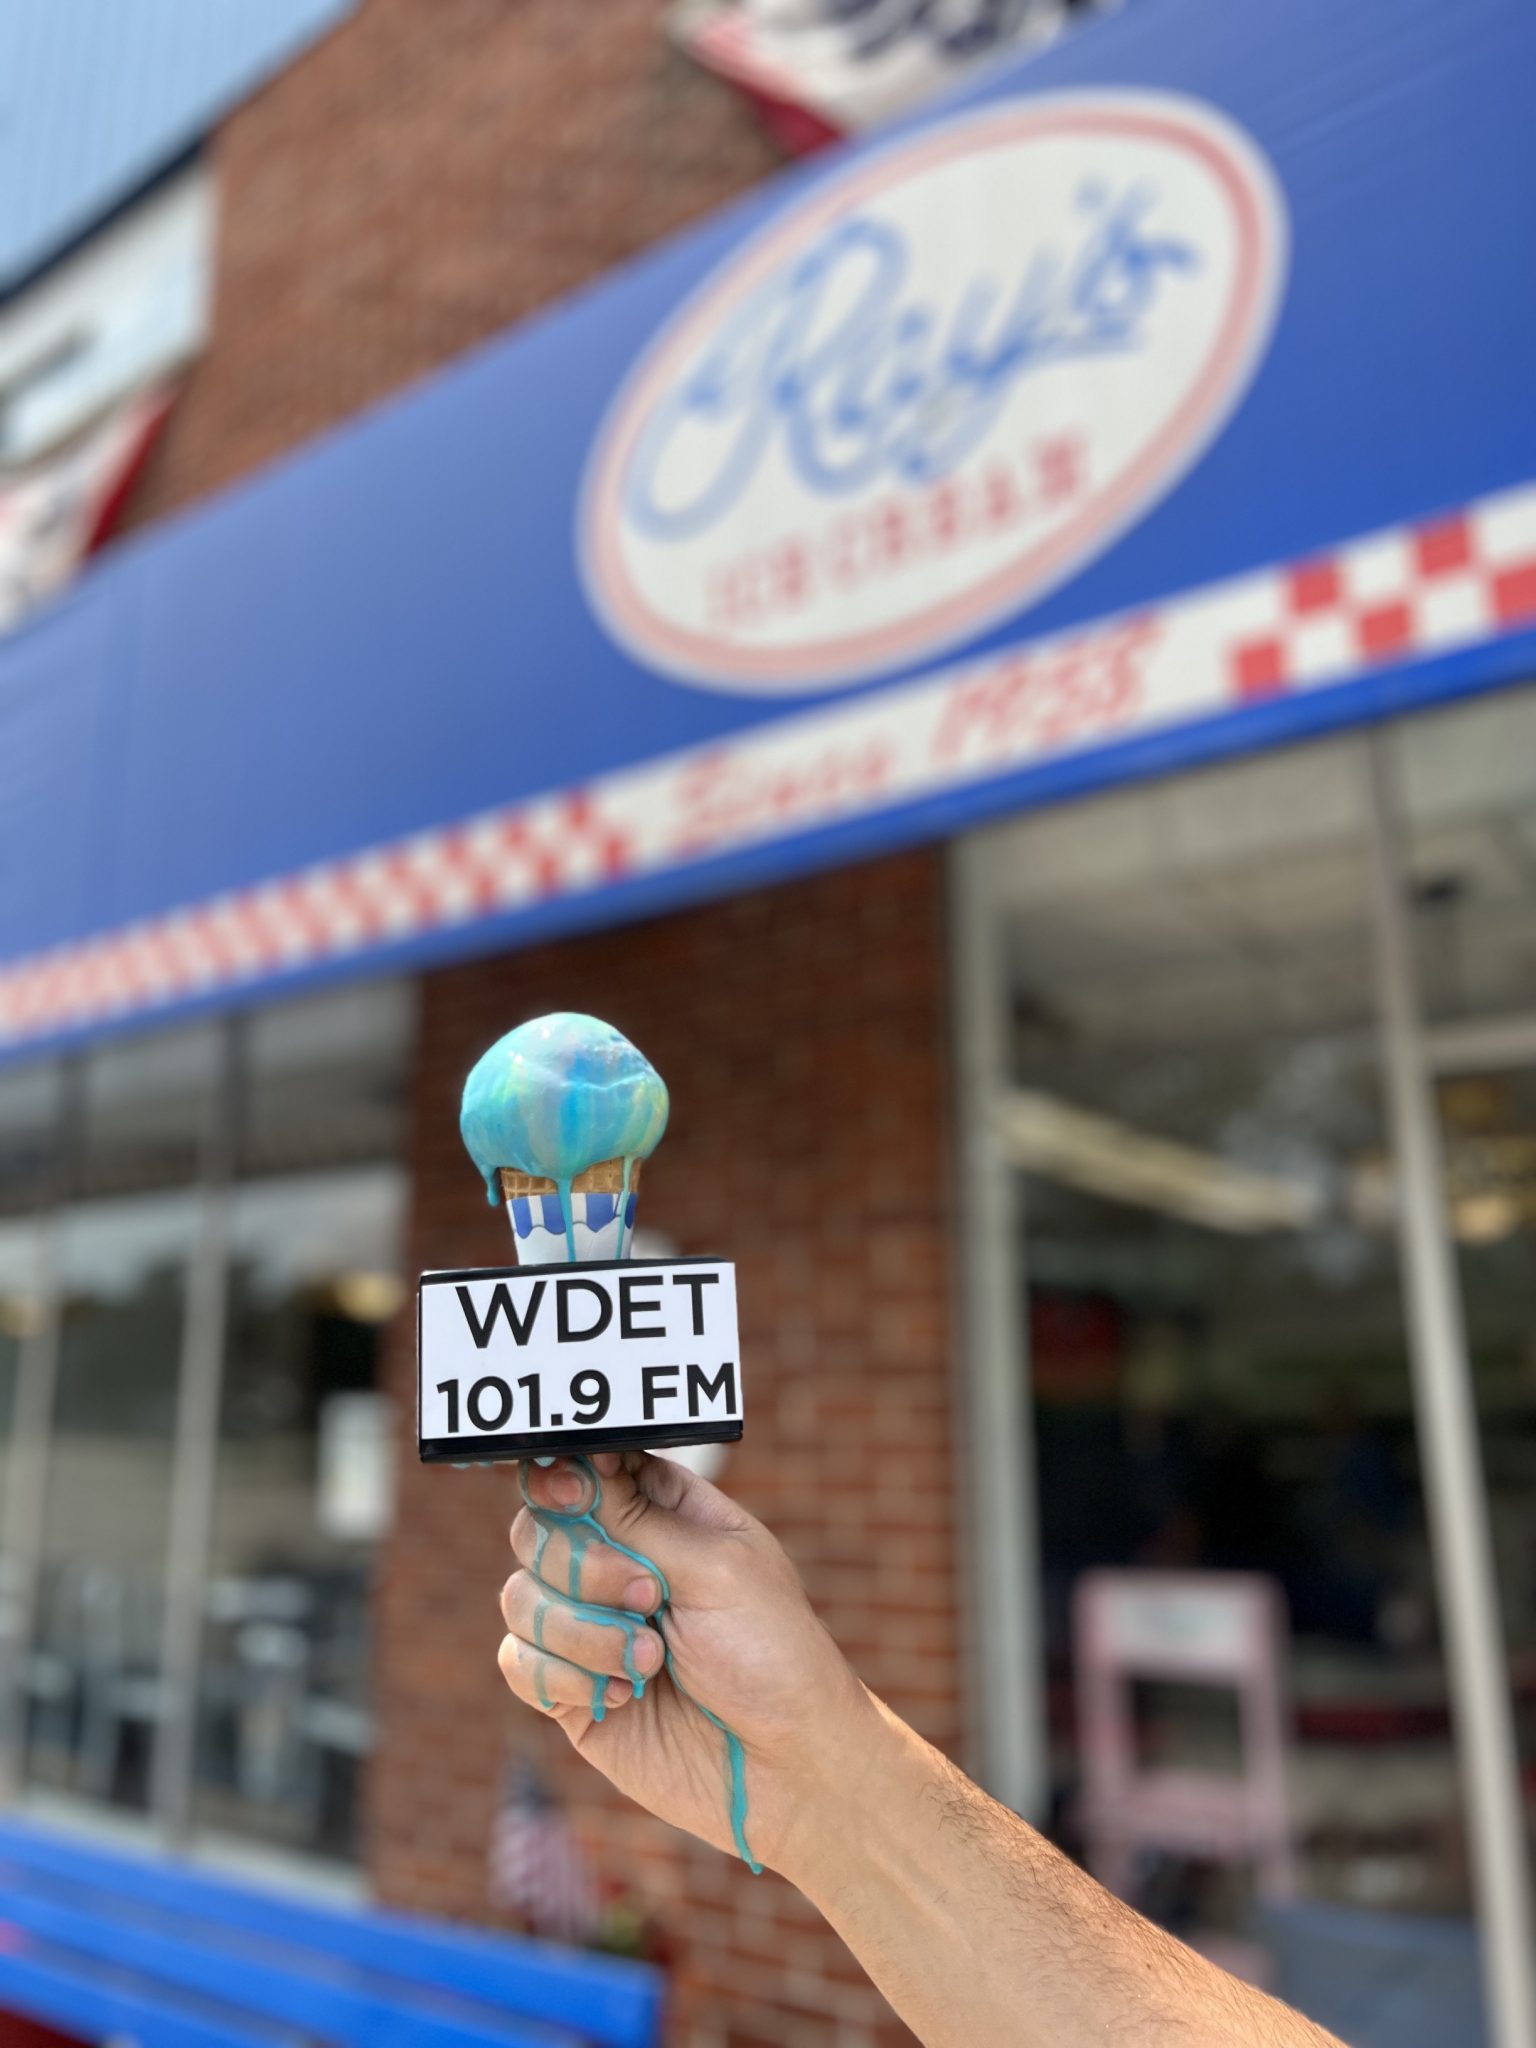 A cone of Superman ice cream with a WDET microphone flag melts down a reporters hand.